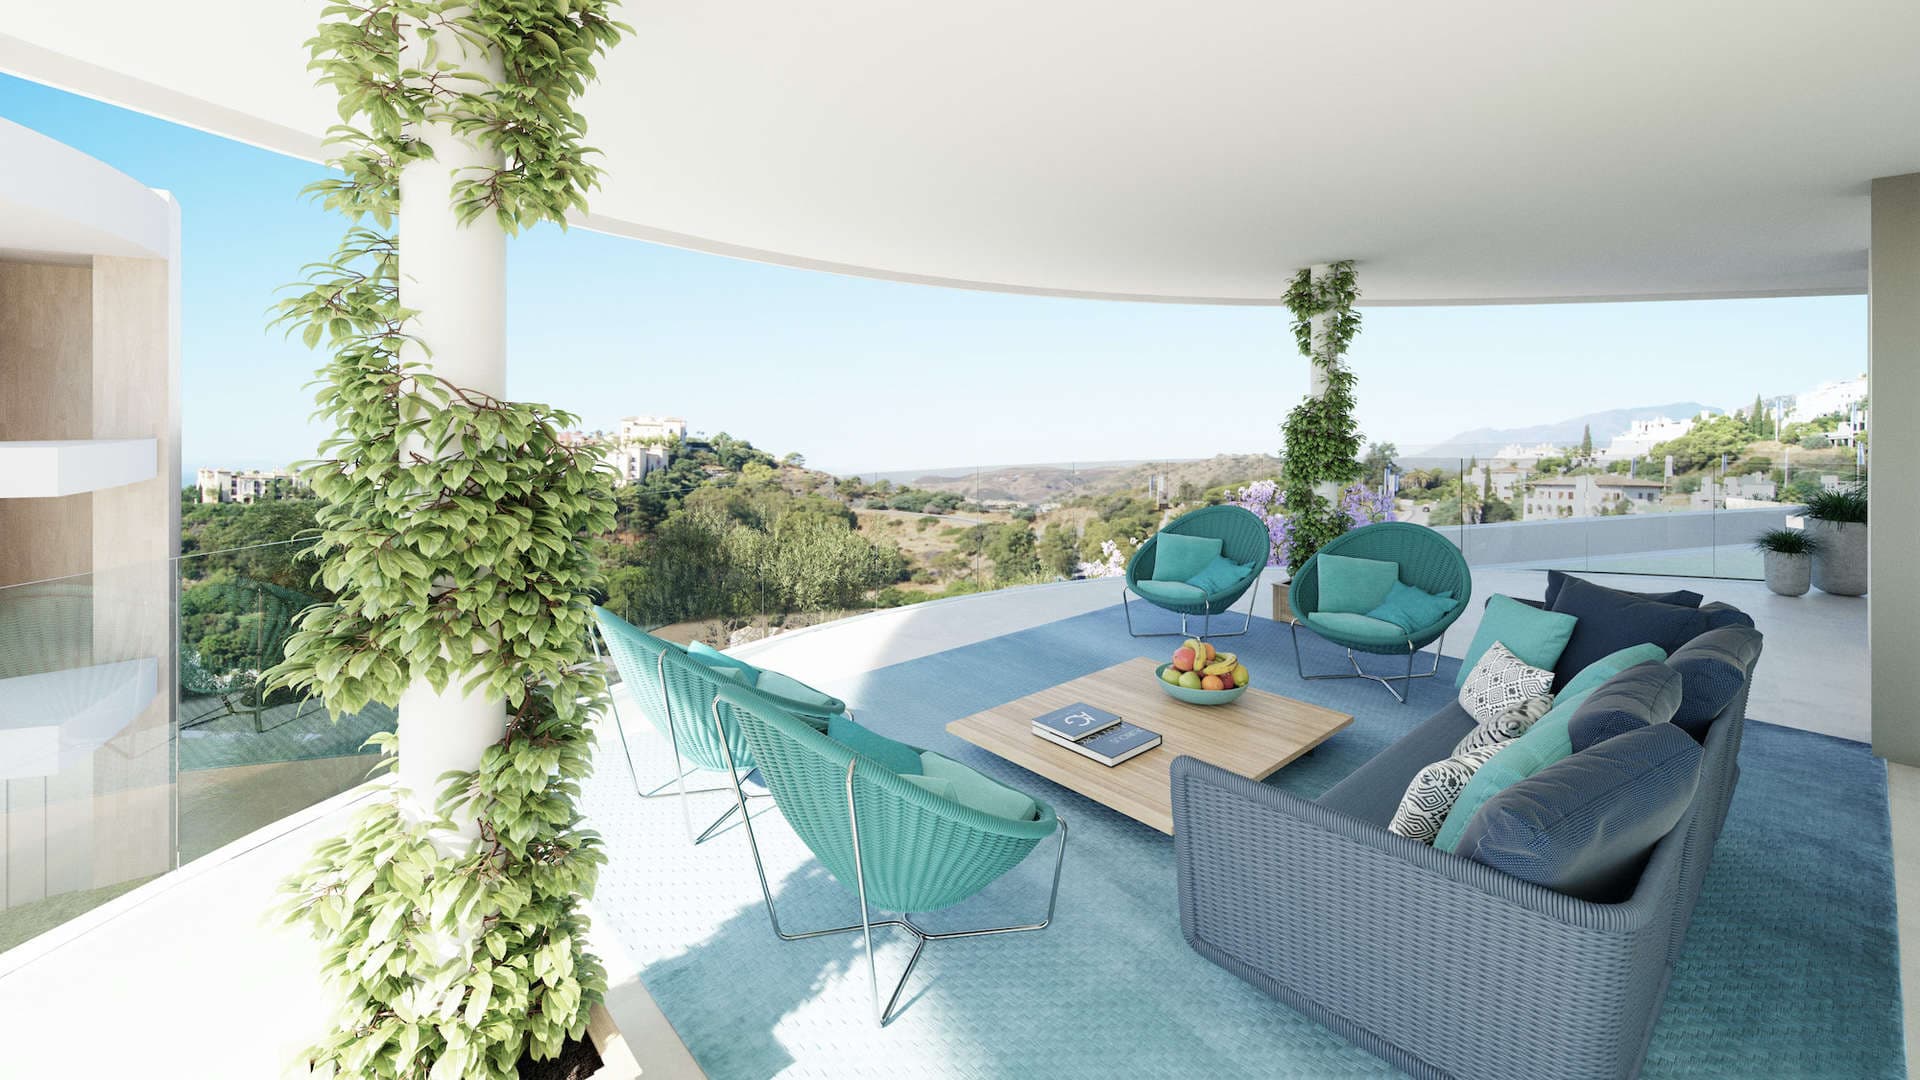 4 Bedroom Penthouse For Sale The View Marbella Lp04168 1ad35768ca9b7b0.jpg